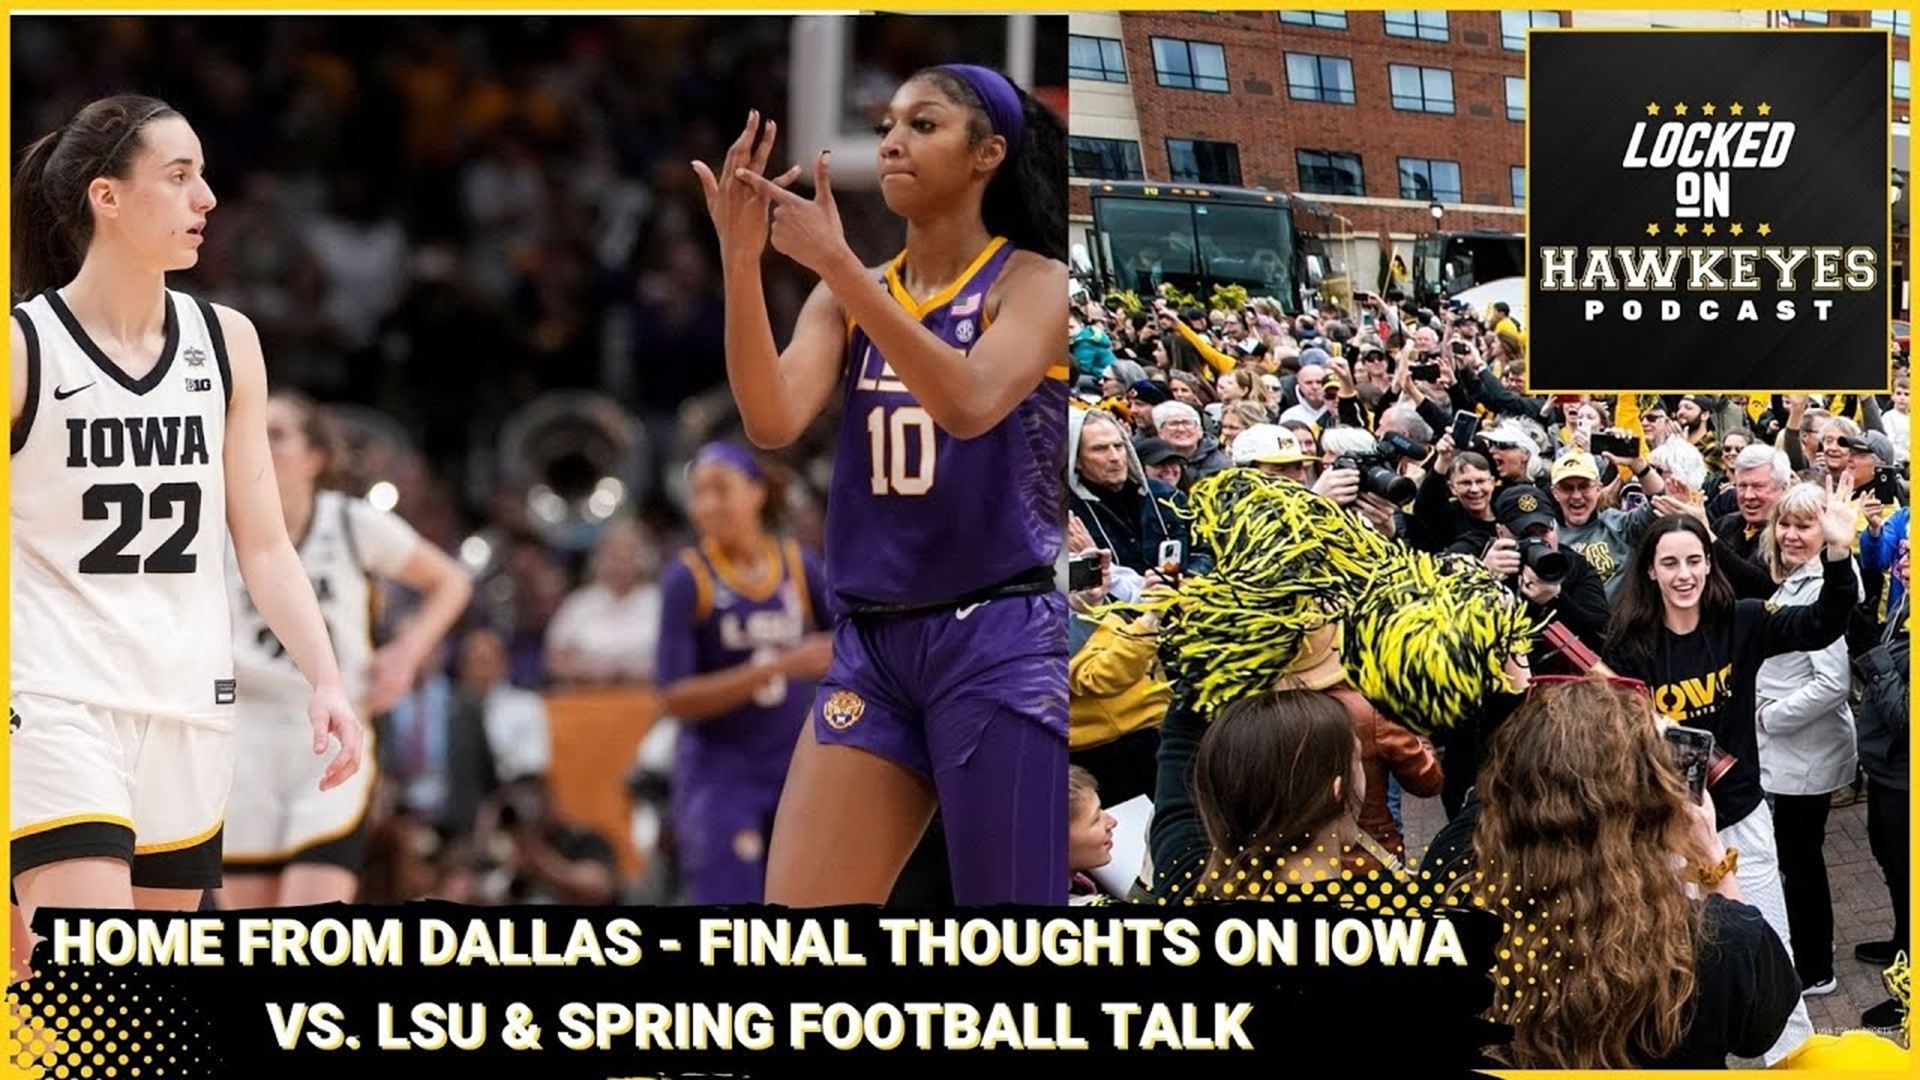 Home from Dallas - Iowa falls in title game, reactions & spring football talk